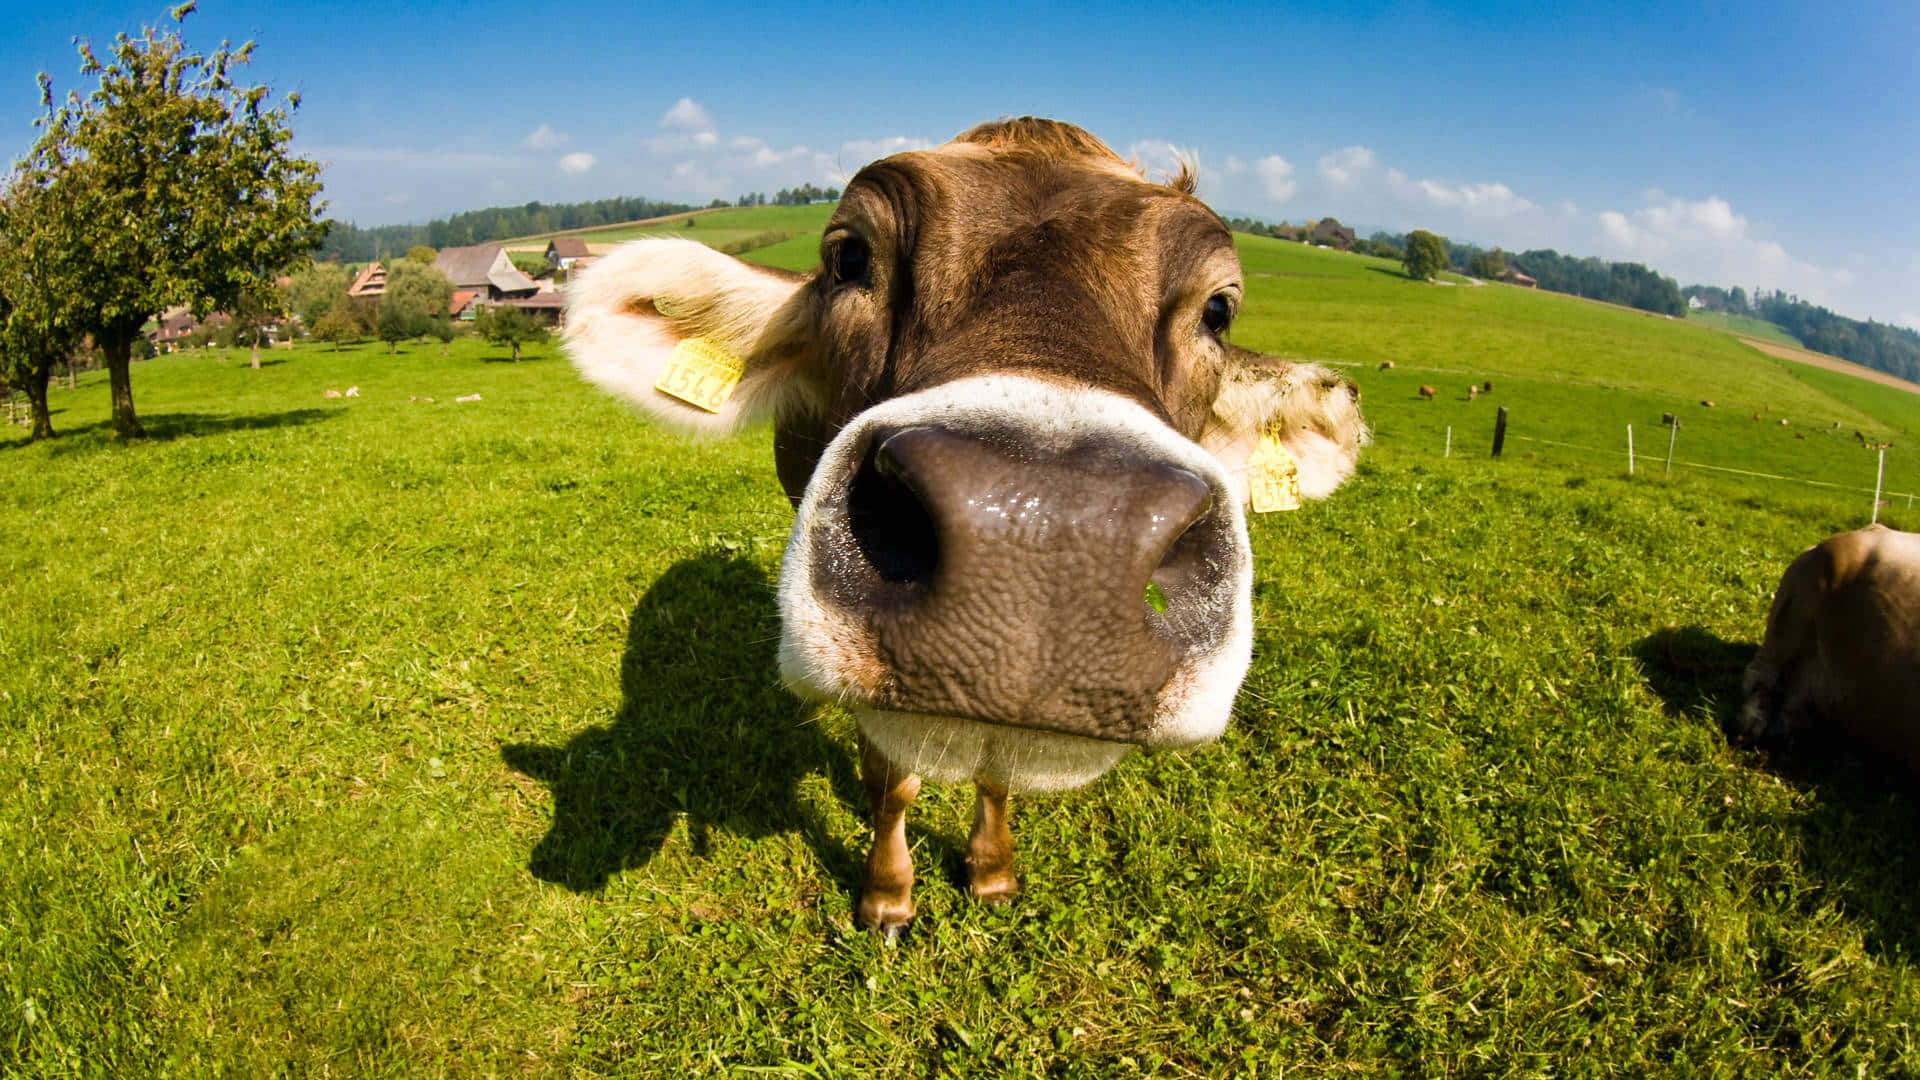 A cow grazing in a peaceful meadow